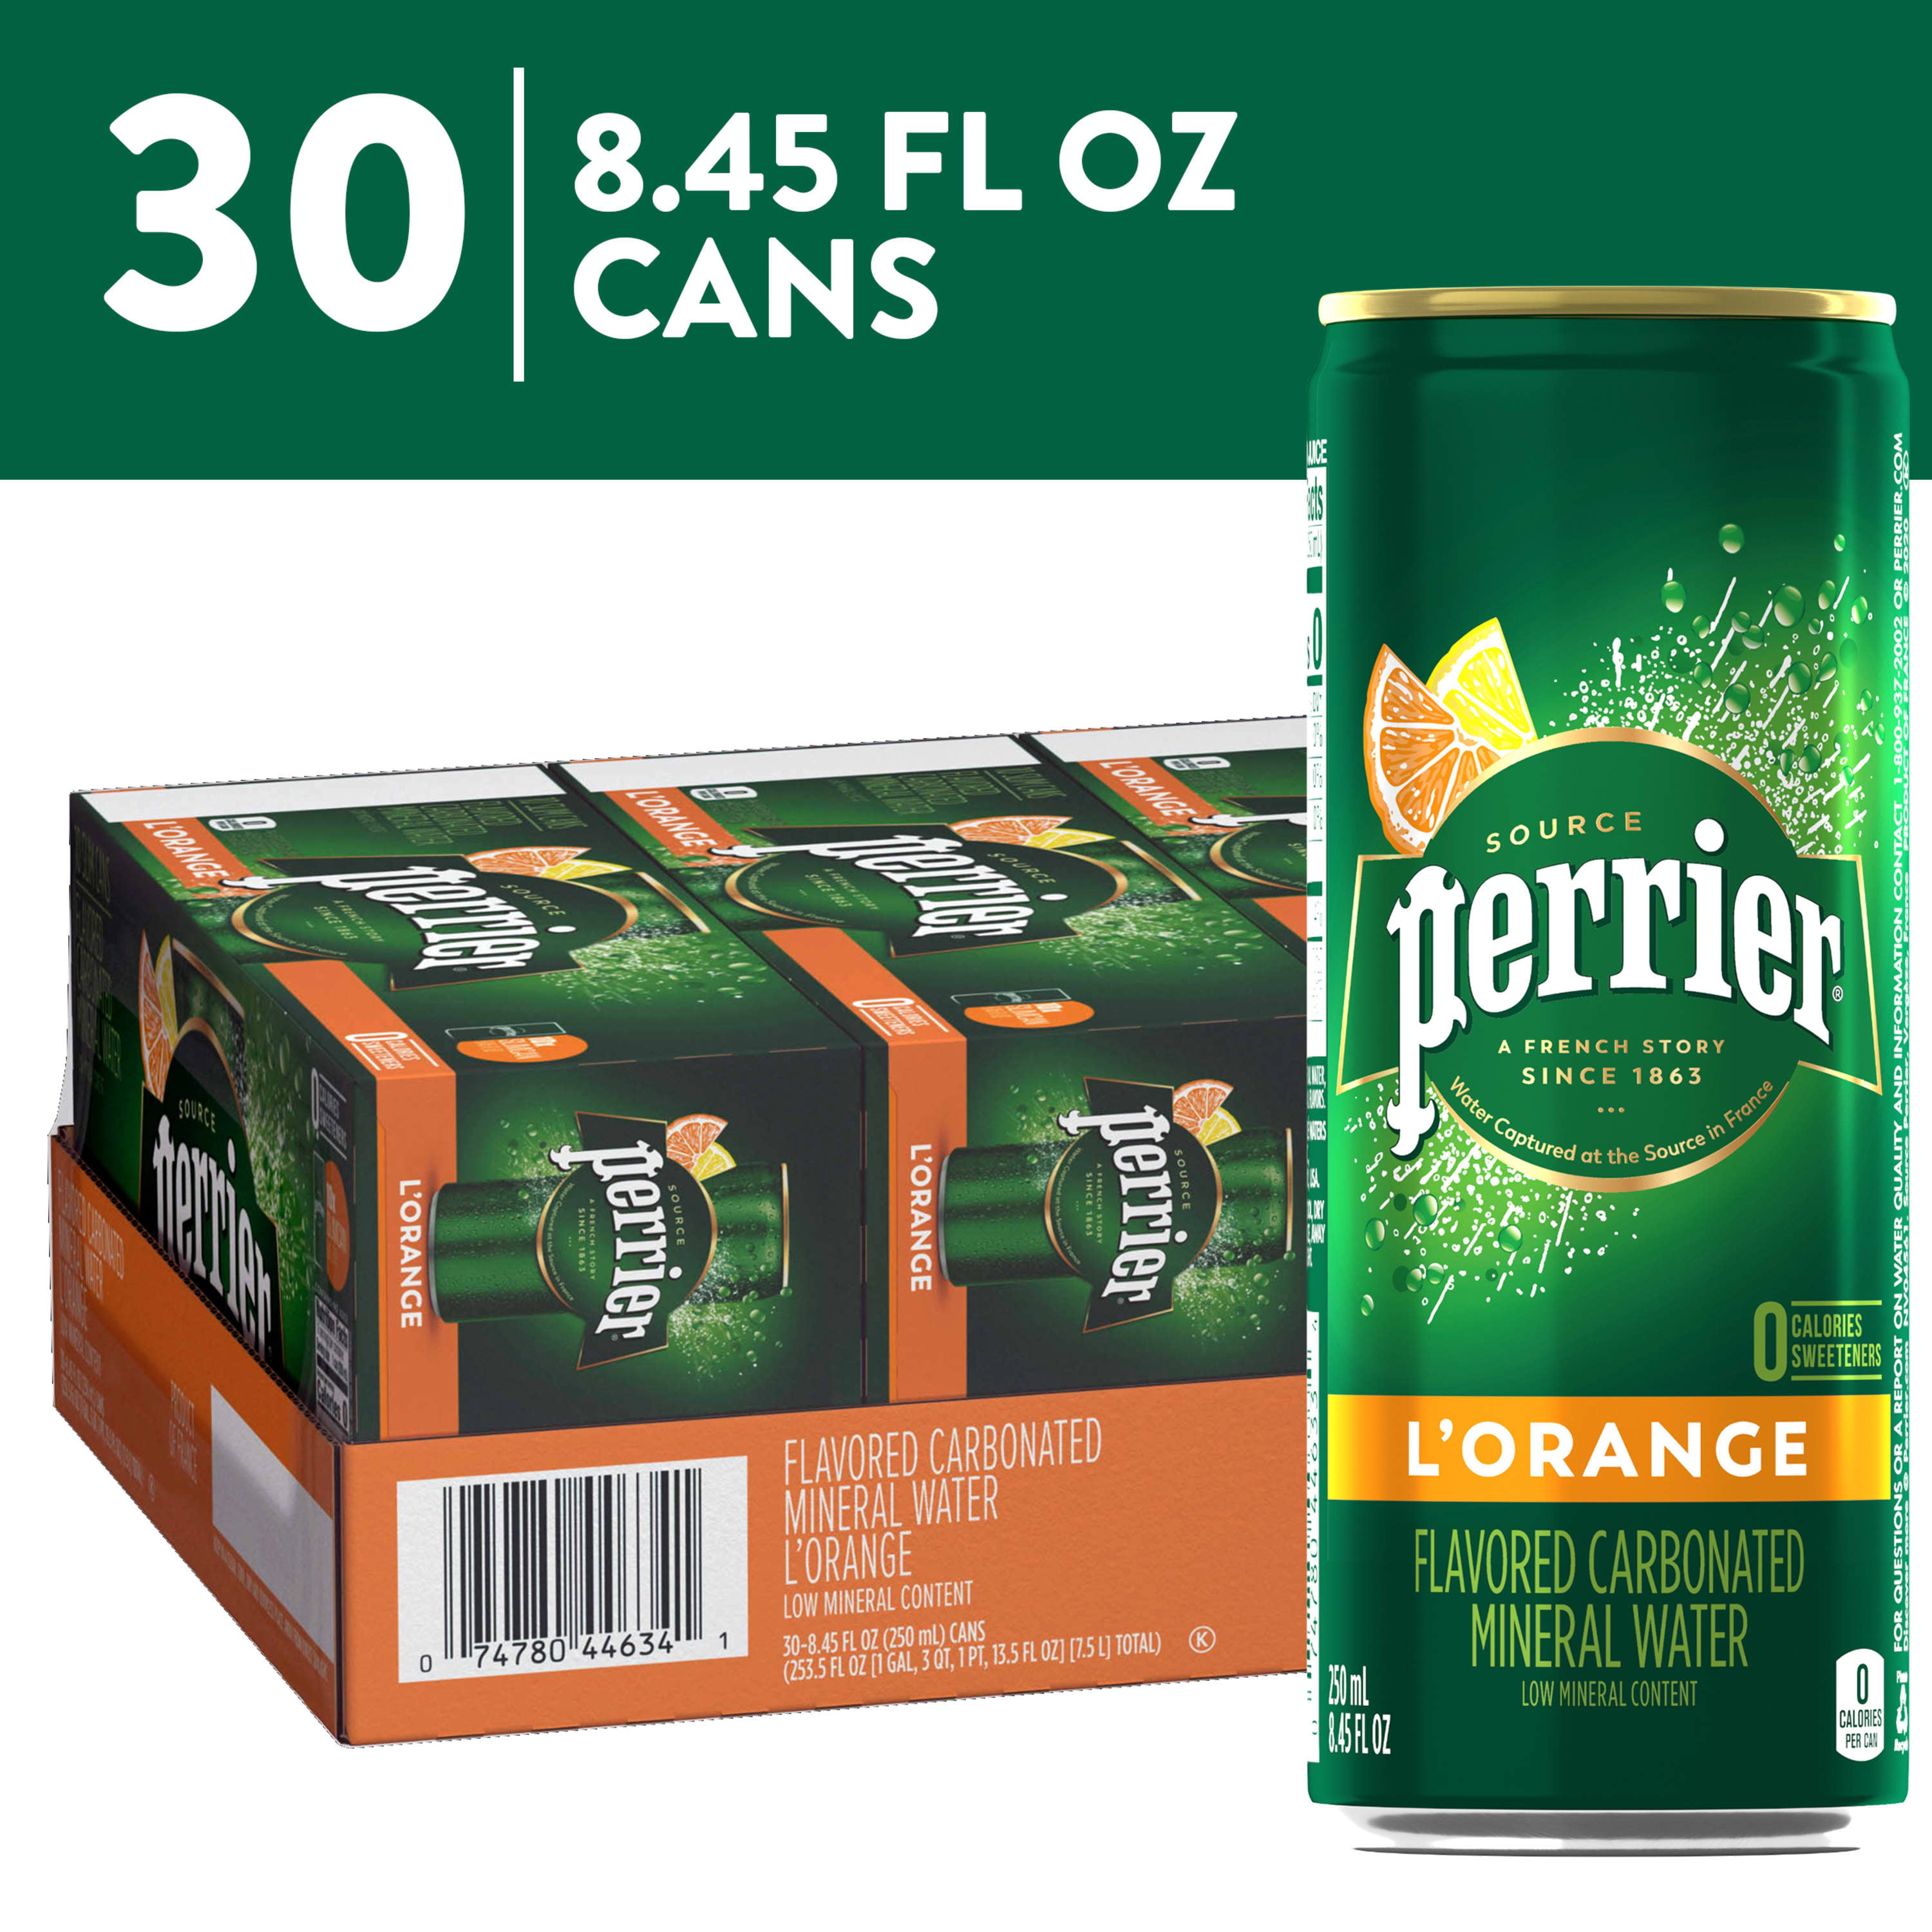 Cans Perrier Fusions 8.45 Fl Oz 24 Count Peach and Cherry Flavor 